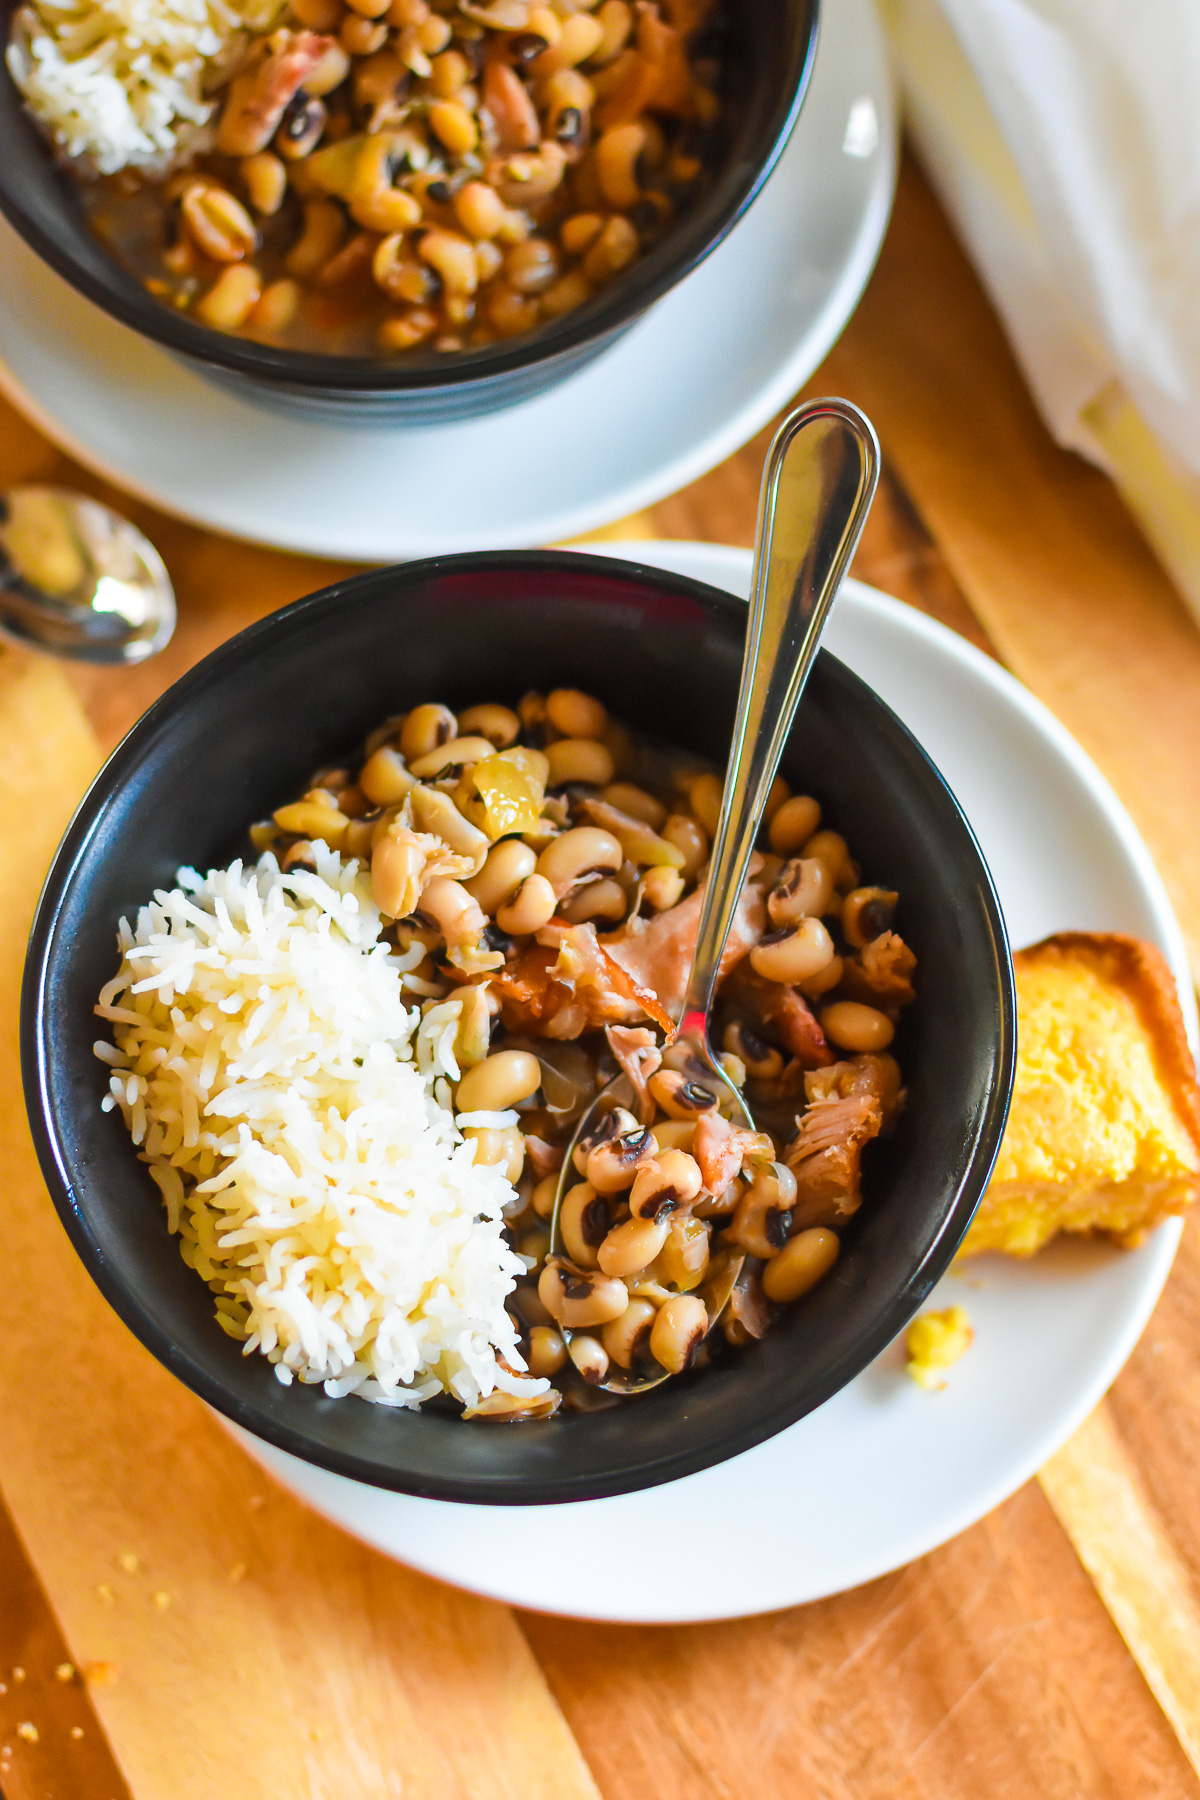 Authentic Soul Food black eyed peas served in black stone bowls with scoops of fluffy white rice and squares of golden cornbread.